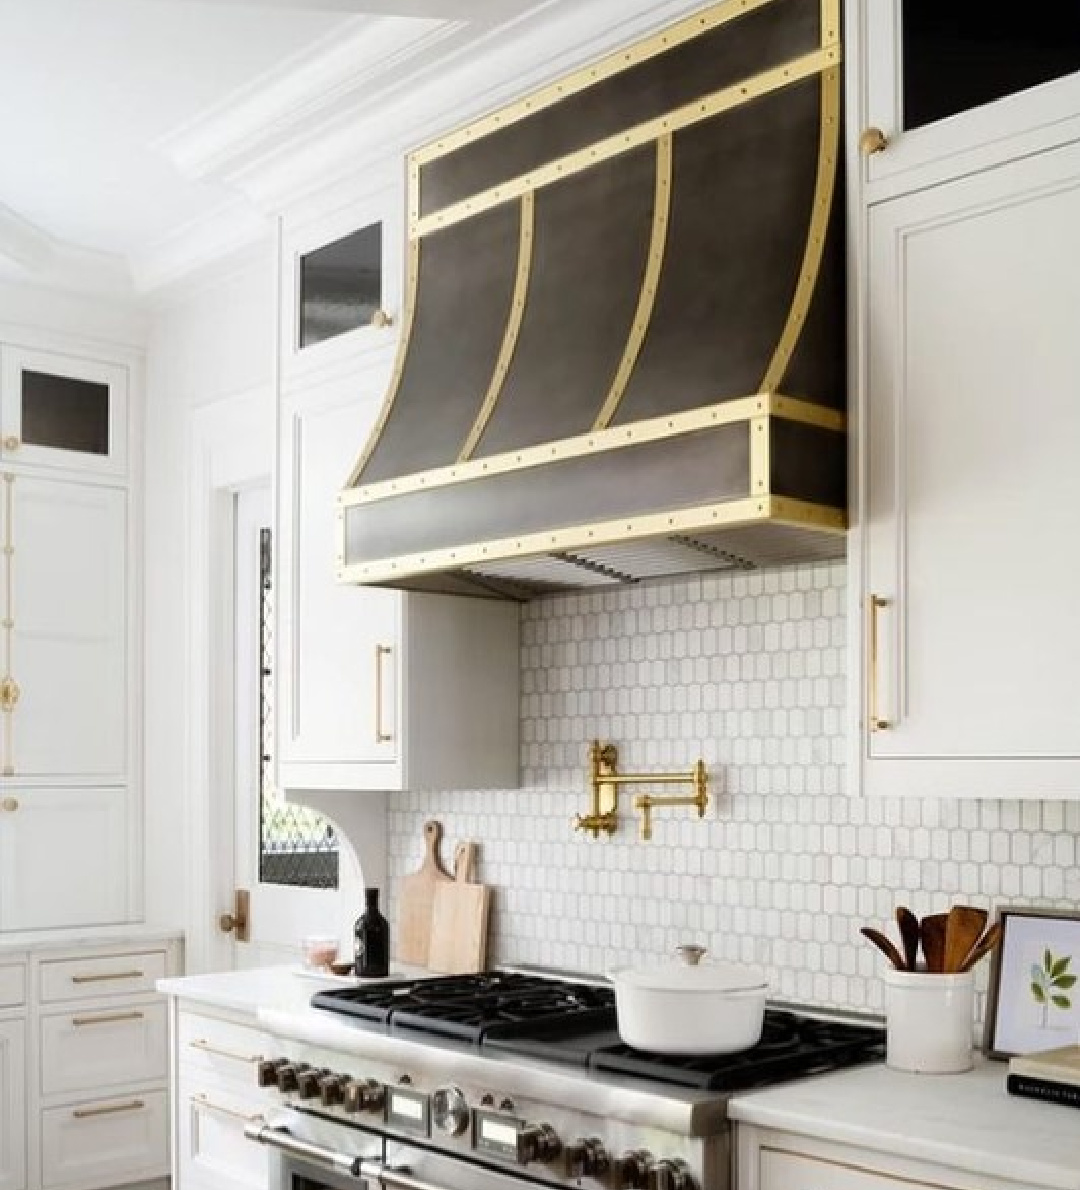 White kitchen cabinets painted Chantilly Lace (Benjamin Moore) and paired with elegant dark range hood with brass - @brittdesignstudio. #chantillylace